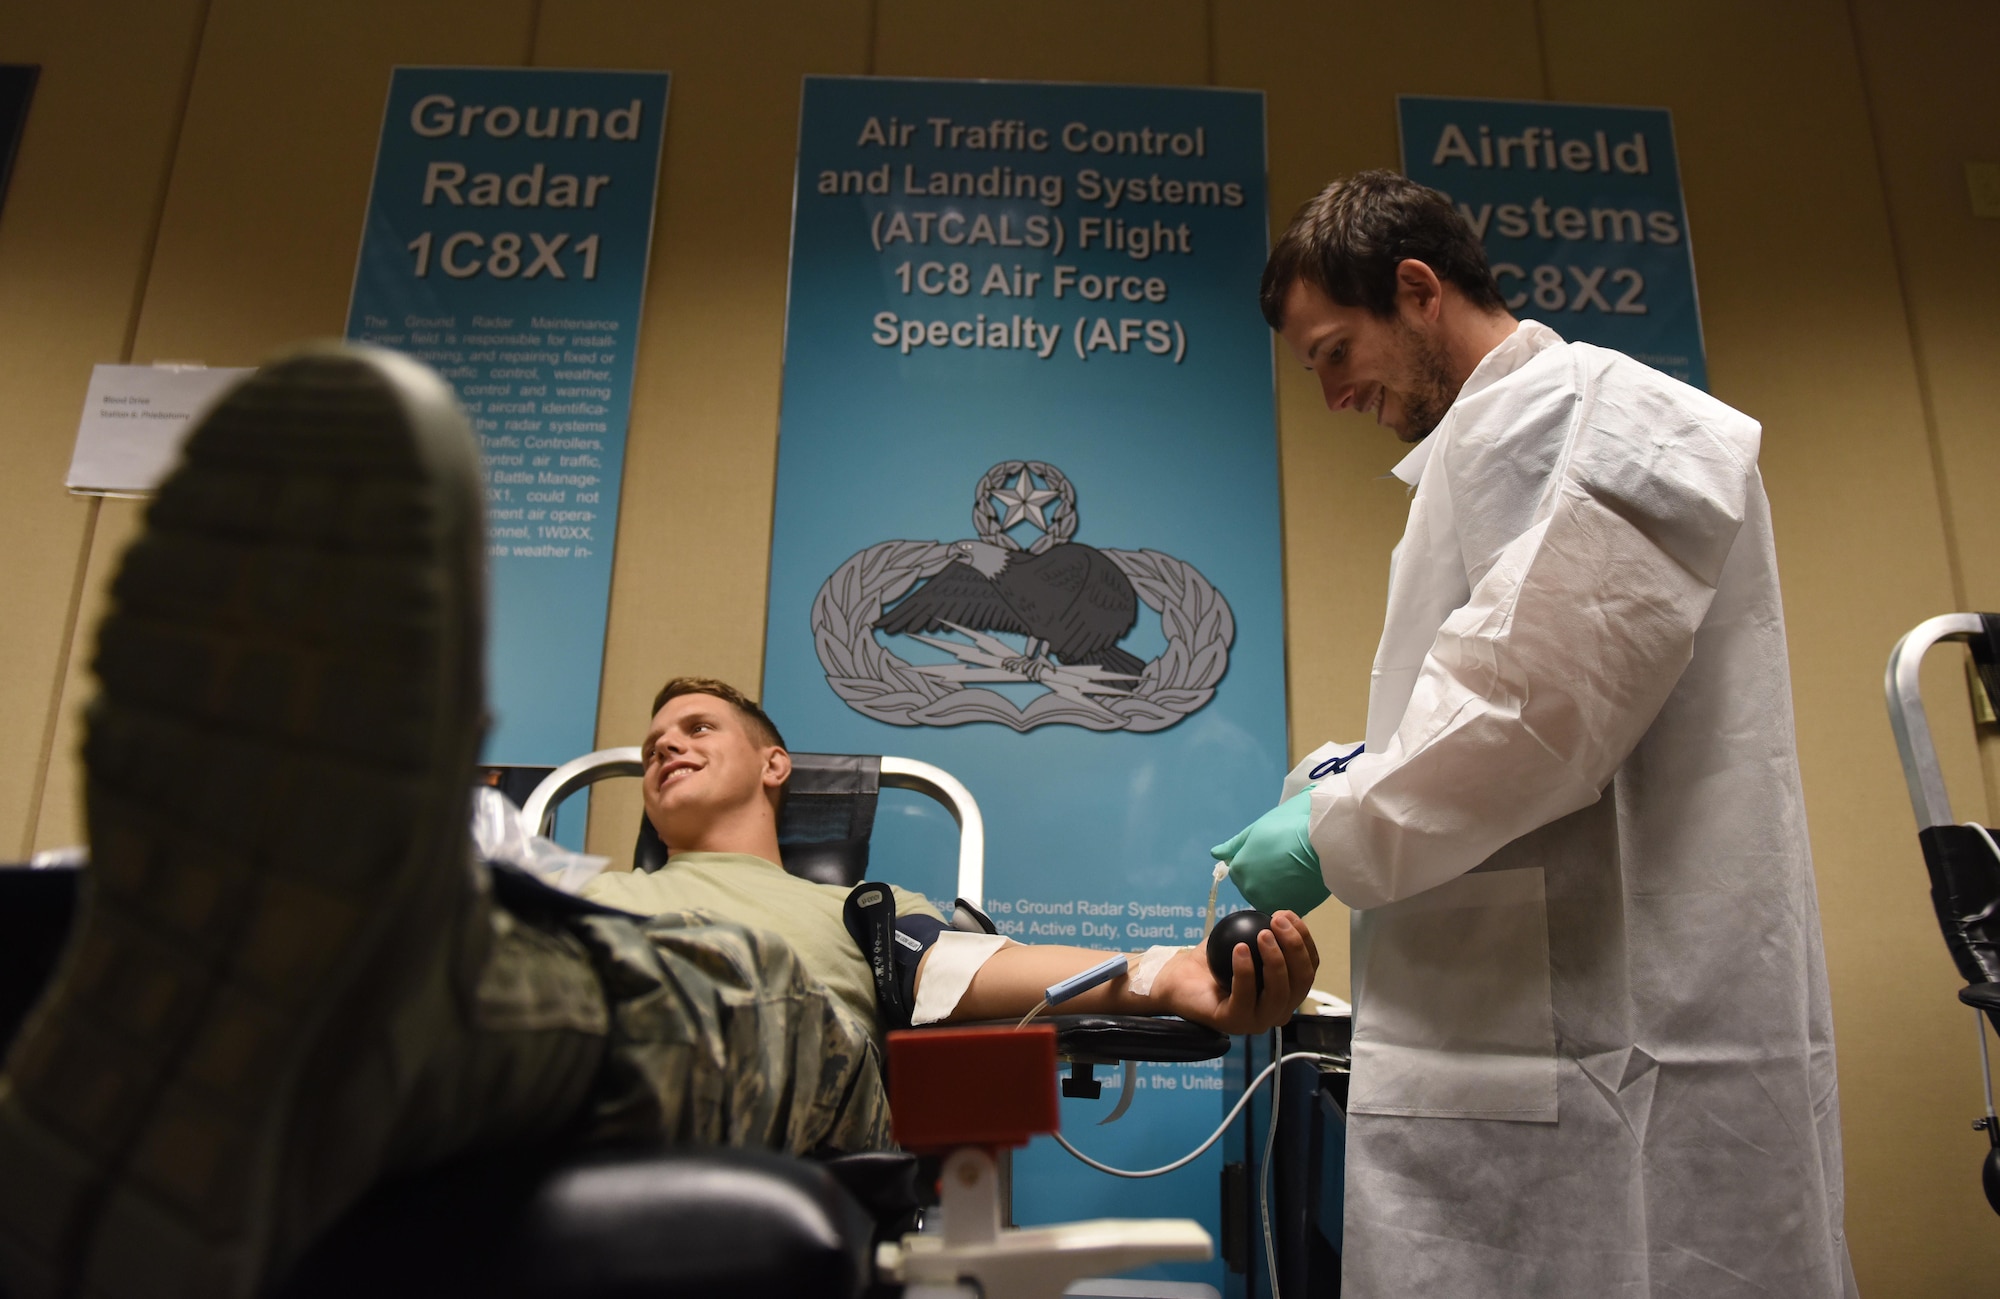 Taylor Neitman, 81st Diagnostic and Therapeutics Squadron medical laboratory technician, draws blood from Airman 1st Class Tré Moritz, 336th Training Squadron student, during a blood drive at Cody Hall Nov. 21, 2016, on Keesler Air Force Base, Miss. The Keesler Blood Donor Center is one of three Air Force blood donor centers and supports the Armed Services Blood Program by collecting blood for the Defense Department for use in deployed locations and military treatment facilities. (U.S. Air Force photo by Senior Airman Holly Mansfield)  